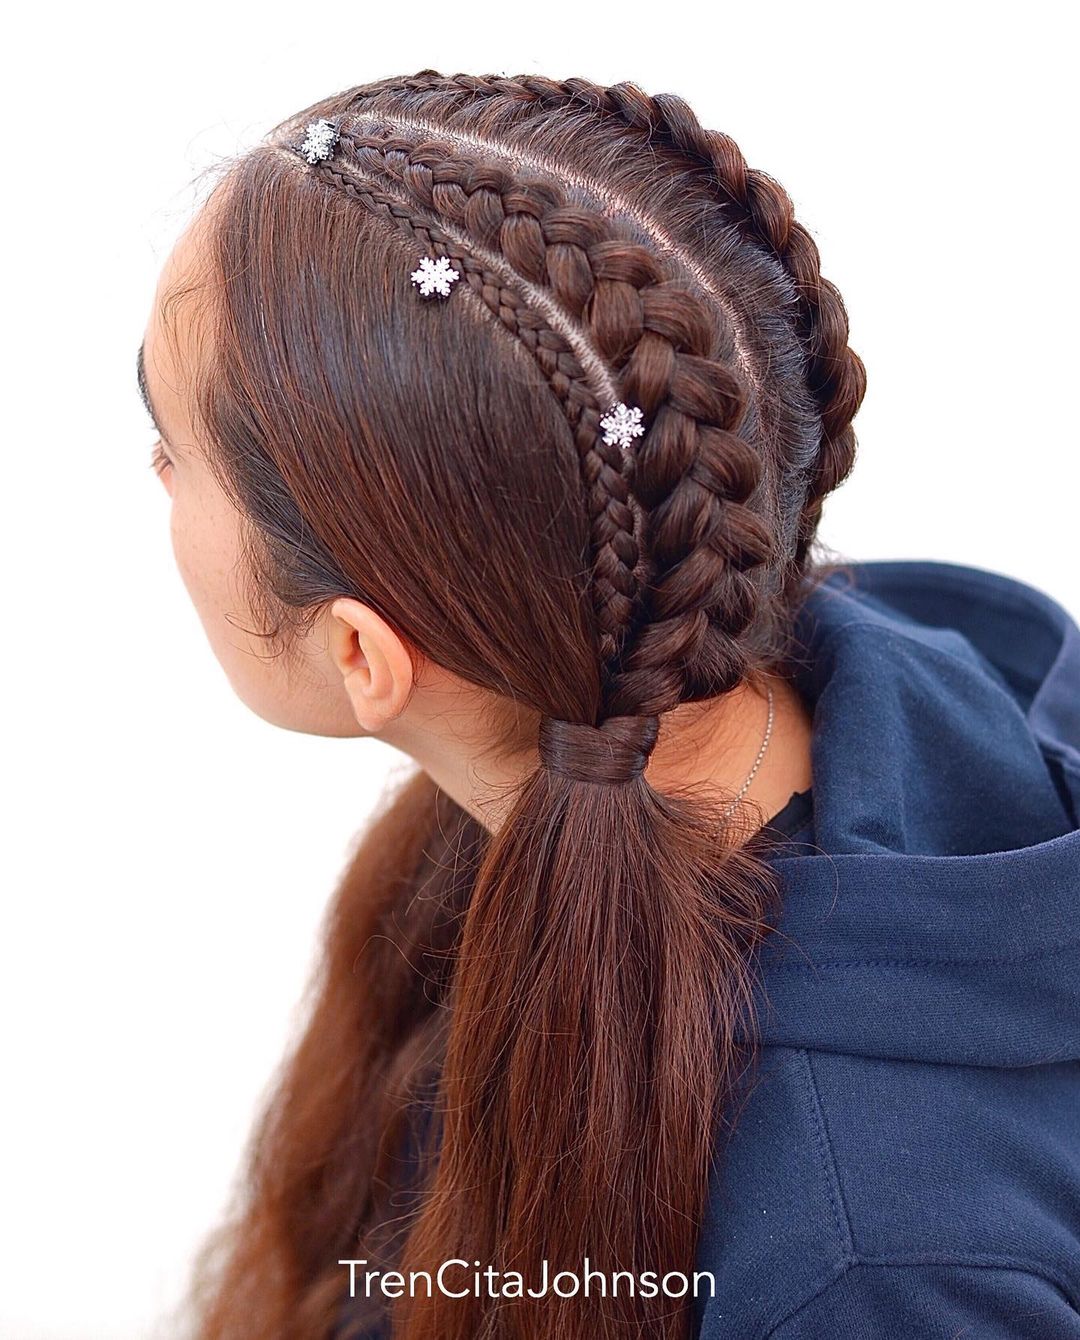 mix pigtail braids with snowflakes